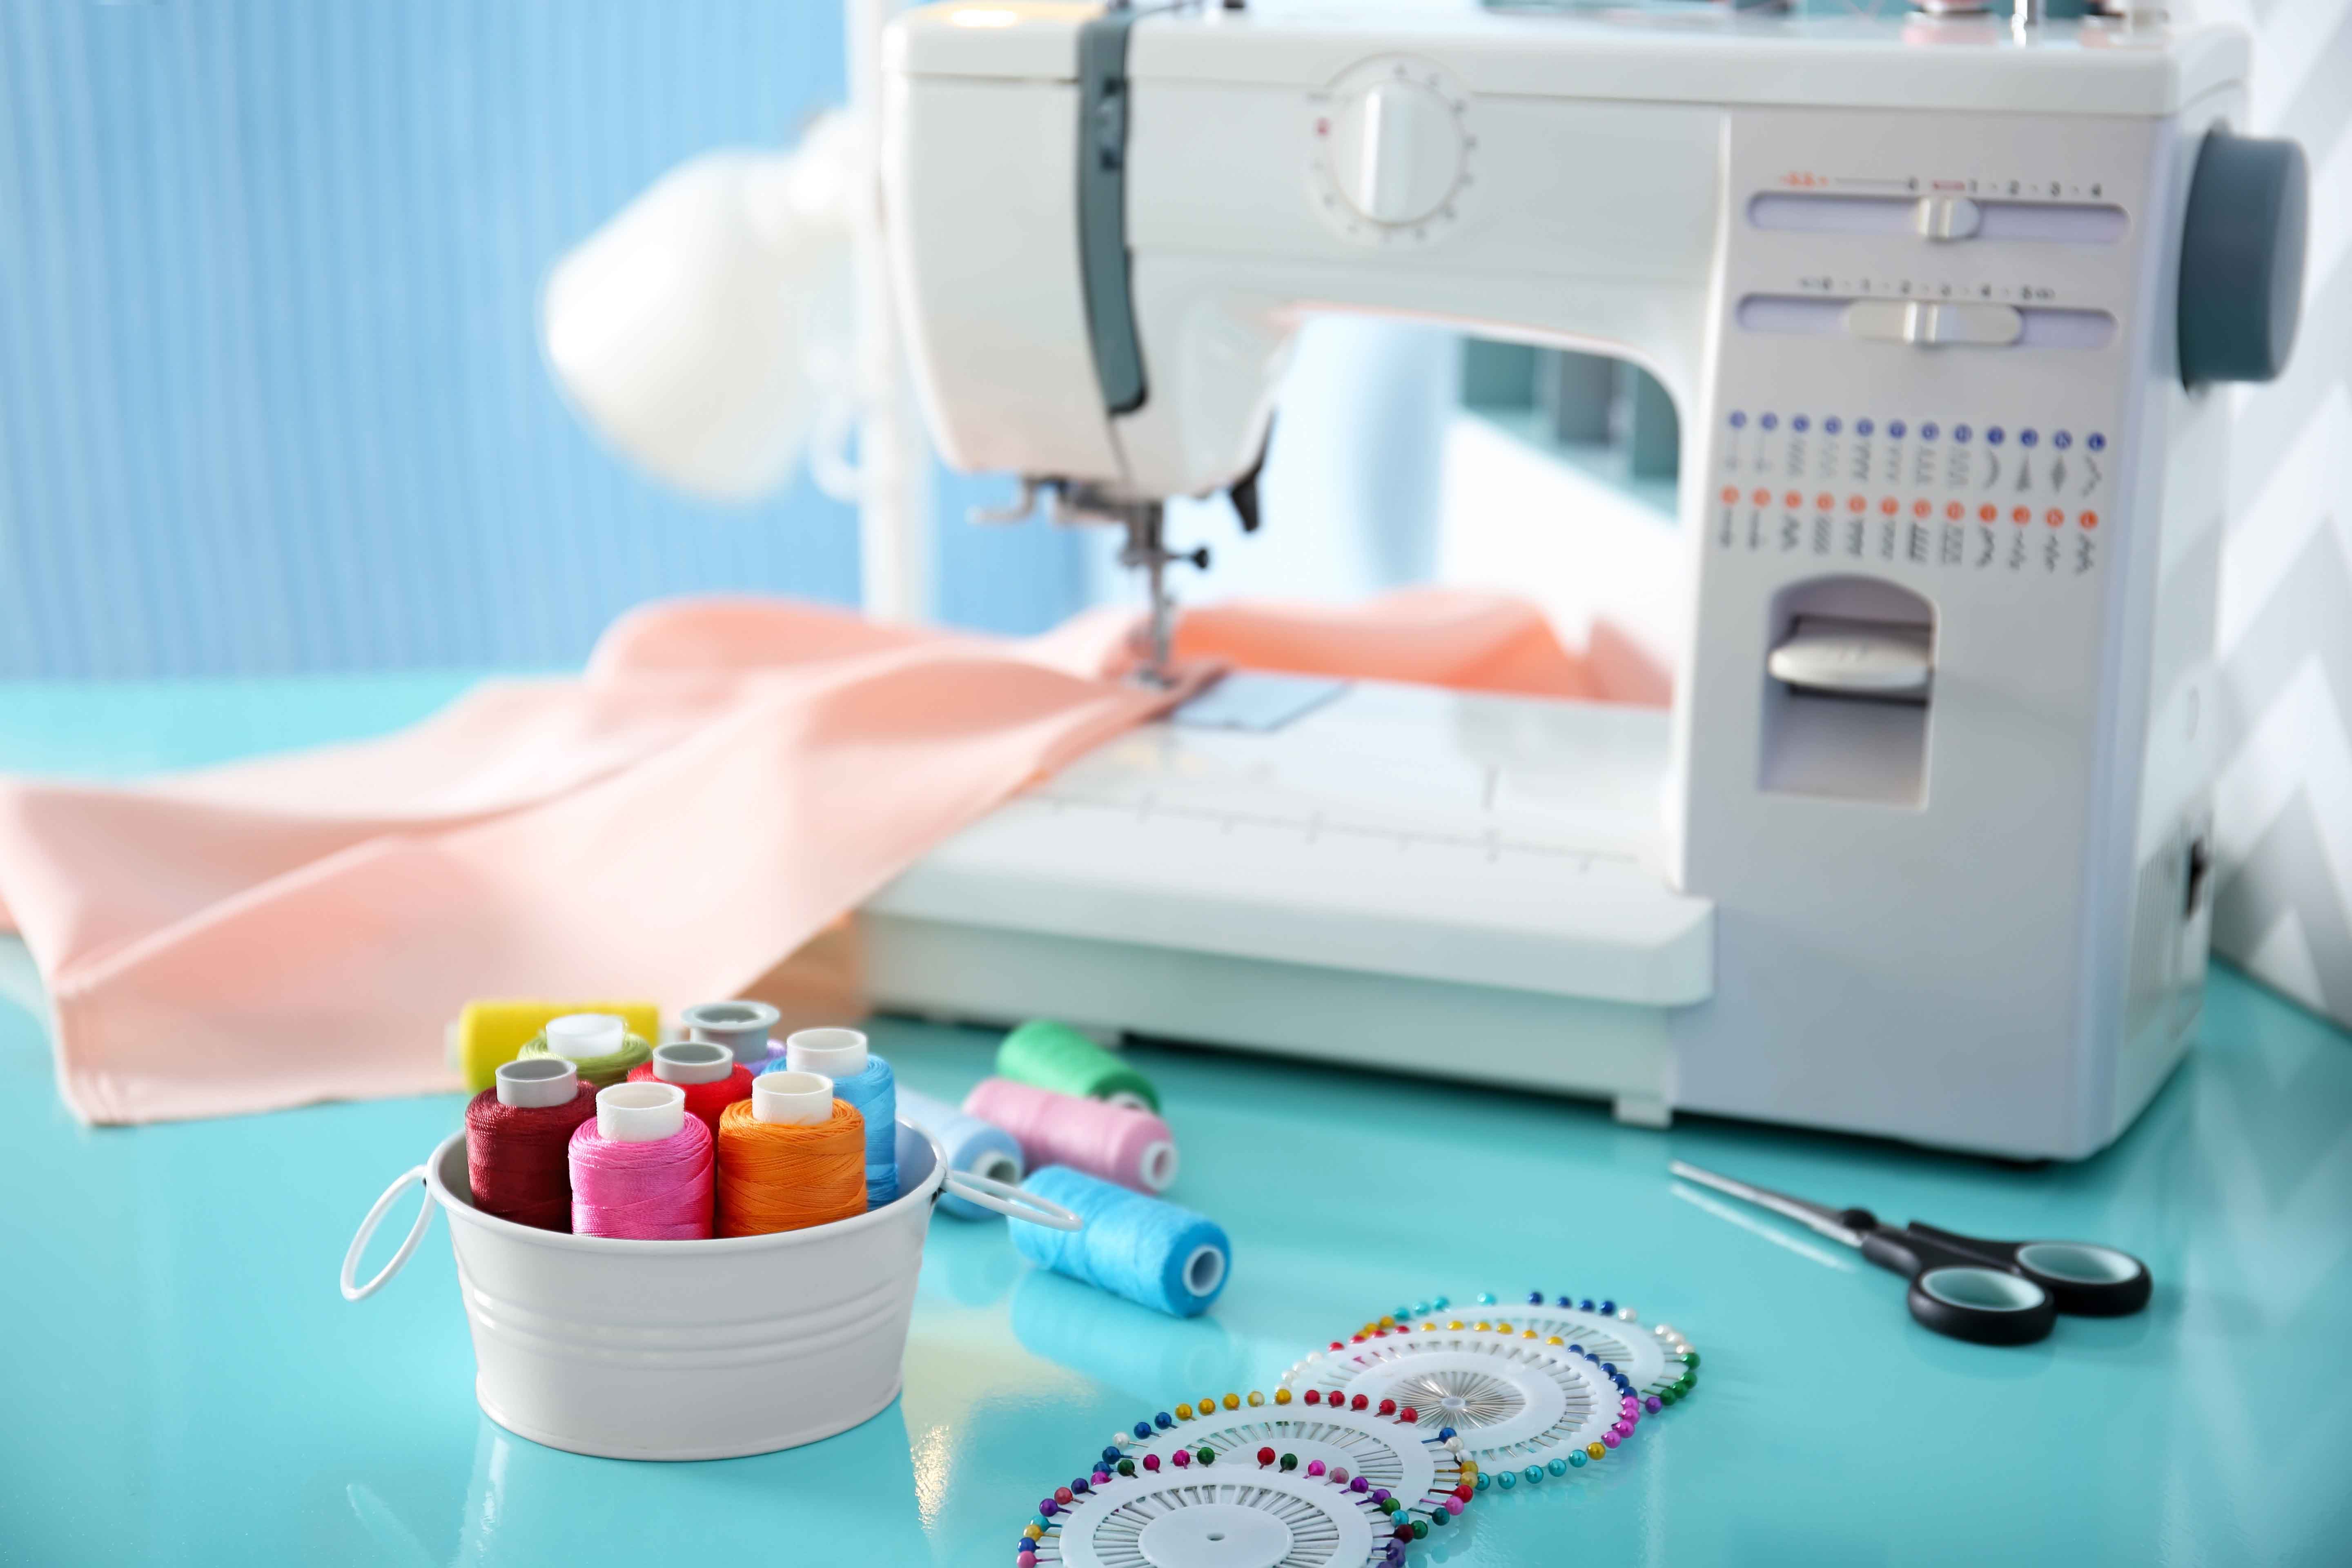 How To Operate A Sewing Machine - Reverasite